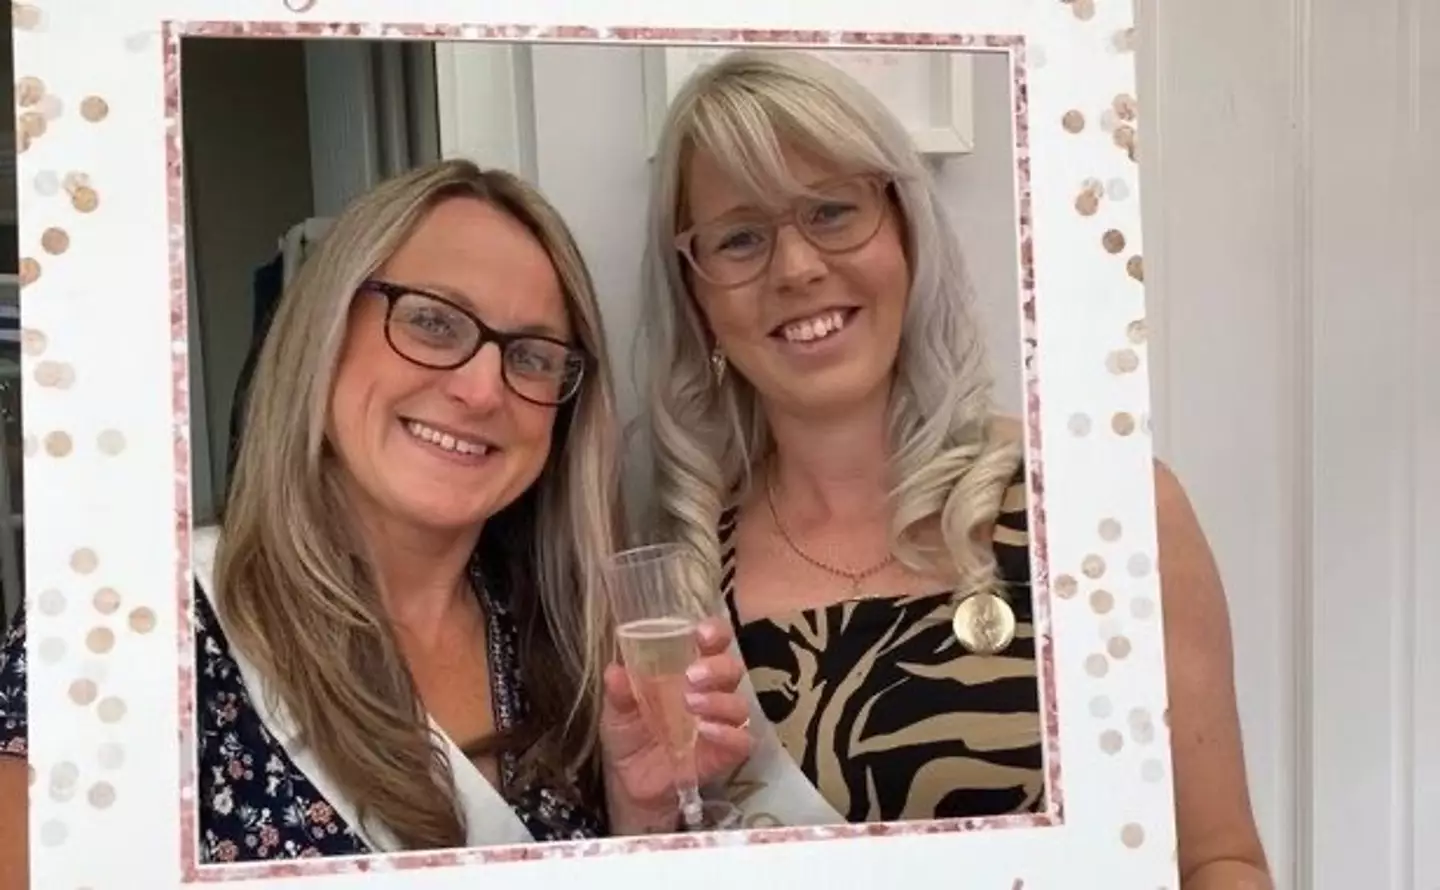 Victoria Powers, 34, (right) from Great Wyrley, was told that her cancer had returned just weeks after celebrating being five years cancer-free.